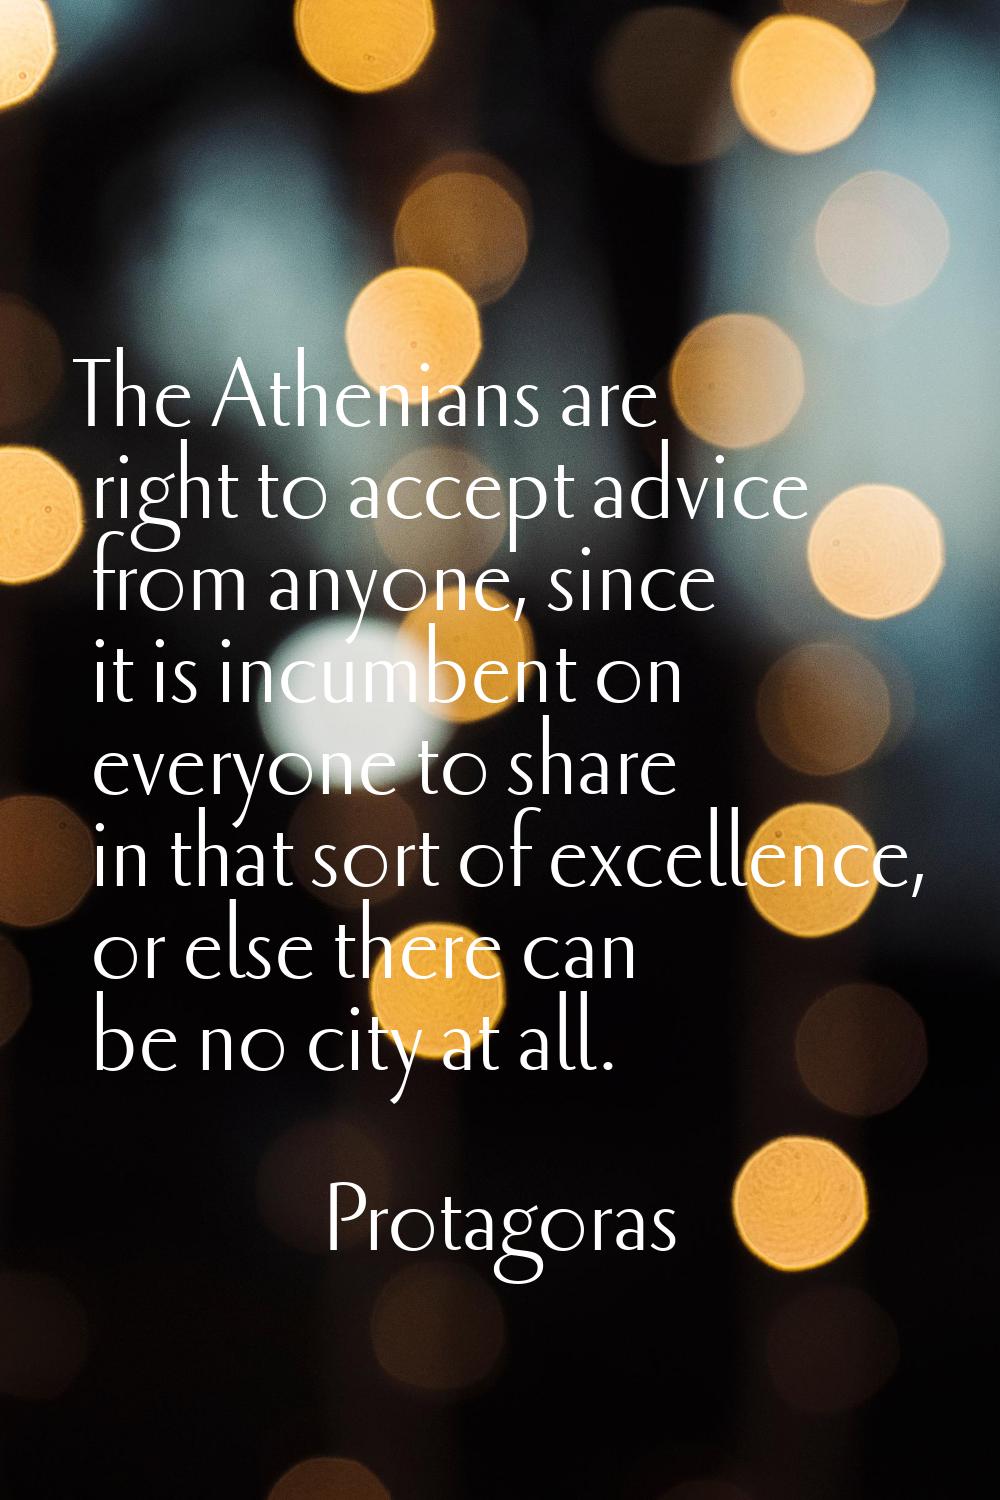 The Athenians are right to accept advice from anyone, since it is incumbent on everyone to share in